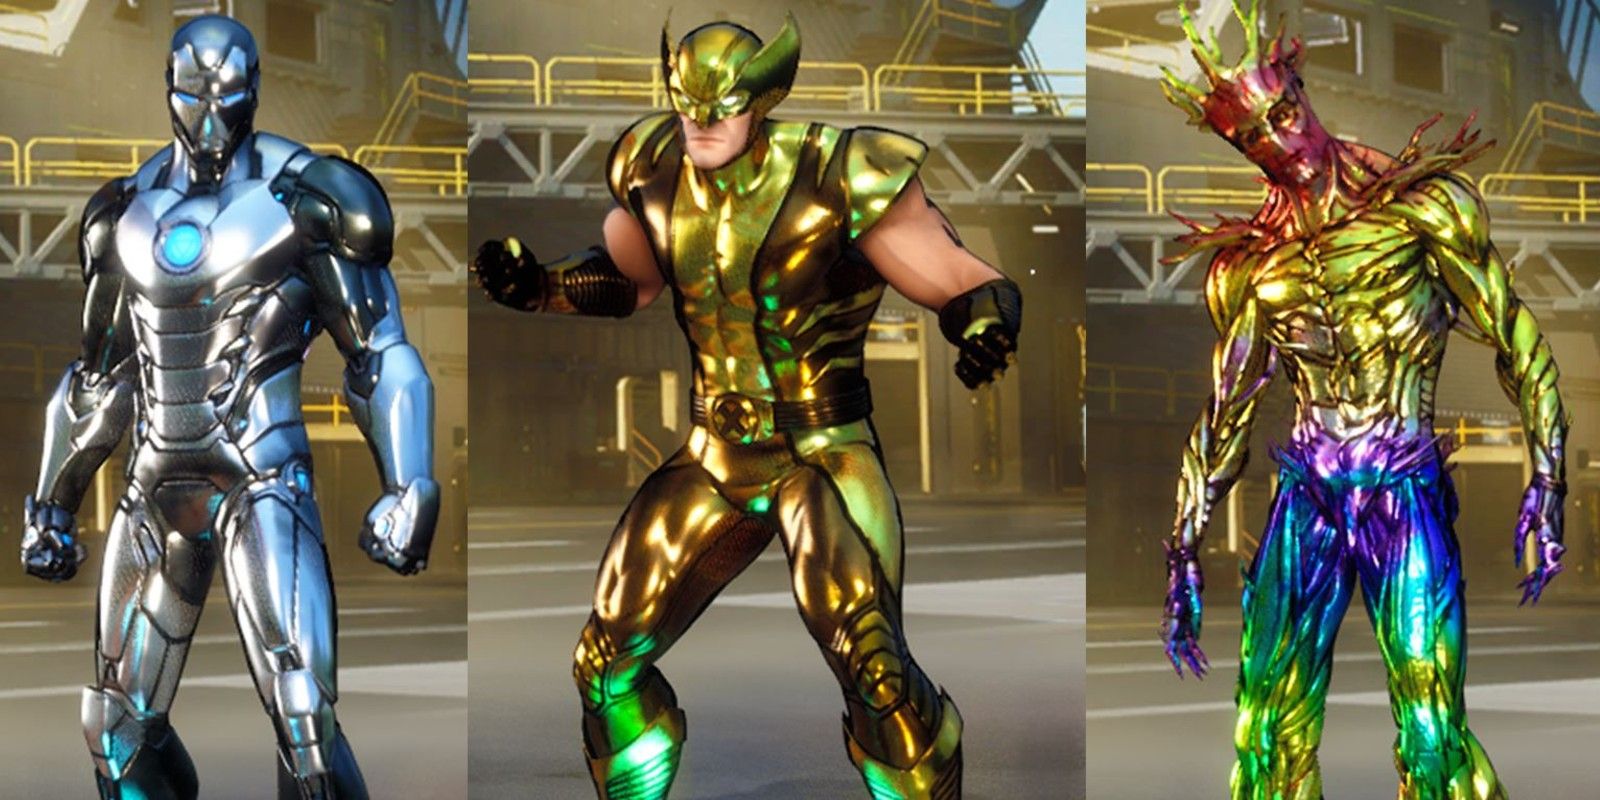 Fortnite Season 4 has three skin variants for each superhero. The Iron Man suit in silver, the Wolverine costume in Gold, and the Groot costume in Holo Foil.